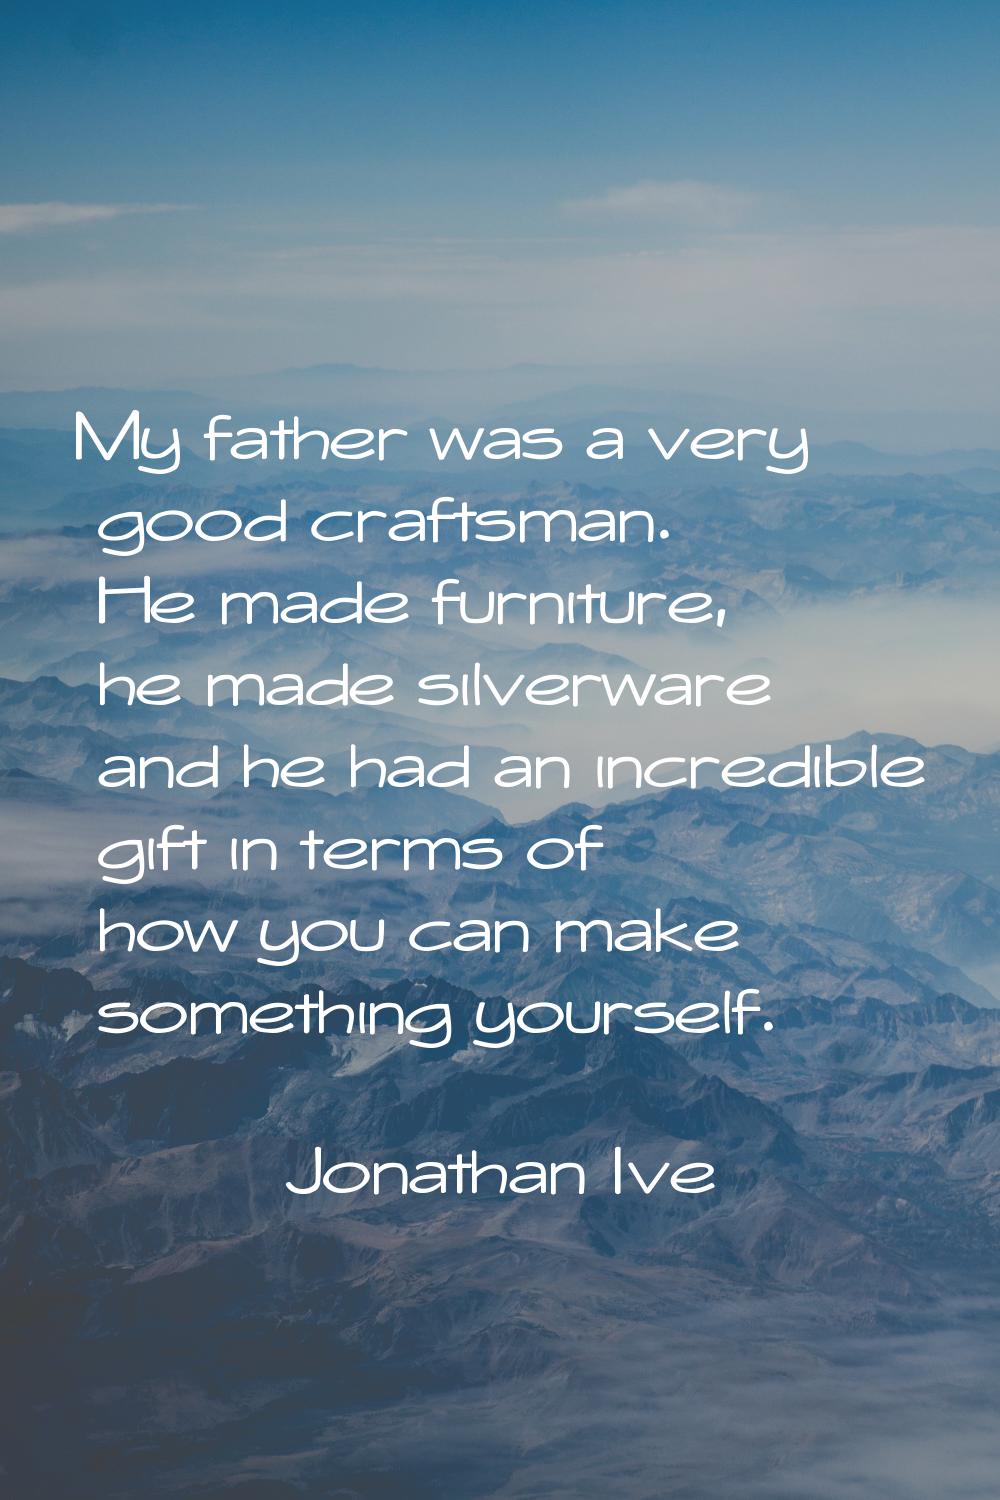 My father was a very good craftsman. He made furniture, he made silverware and he had an incredible